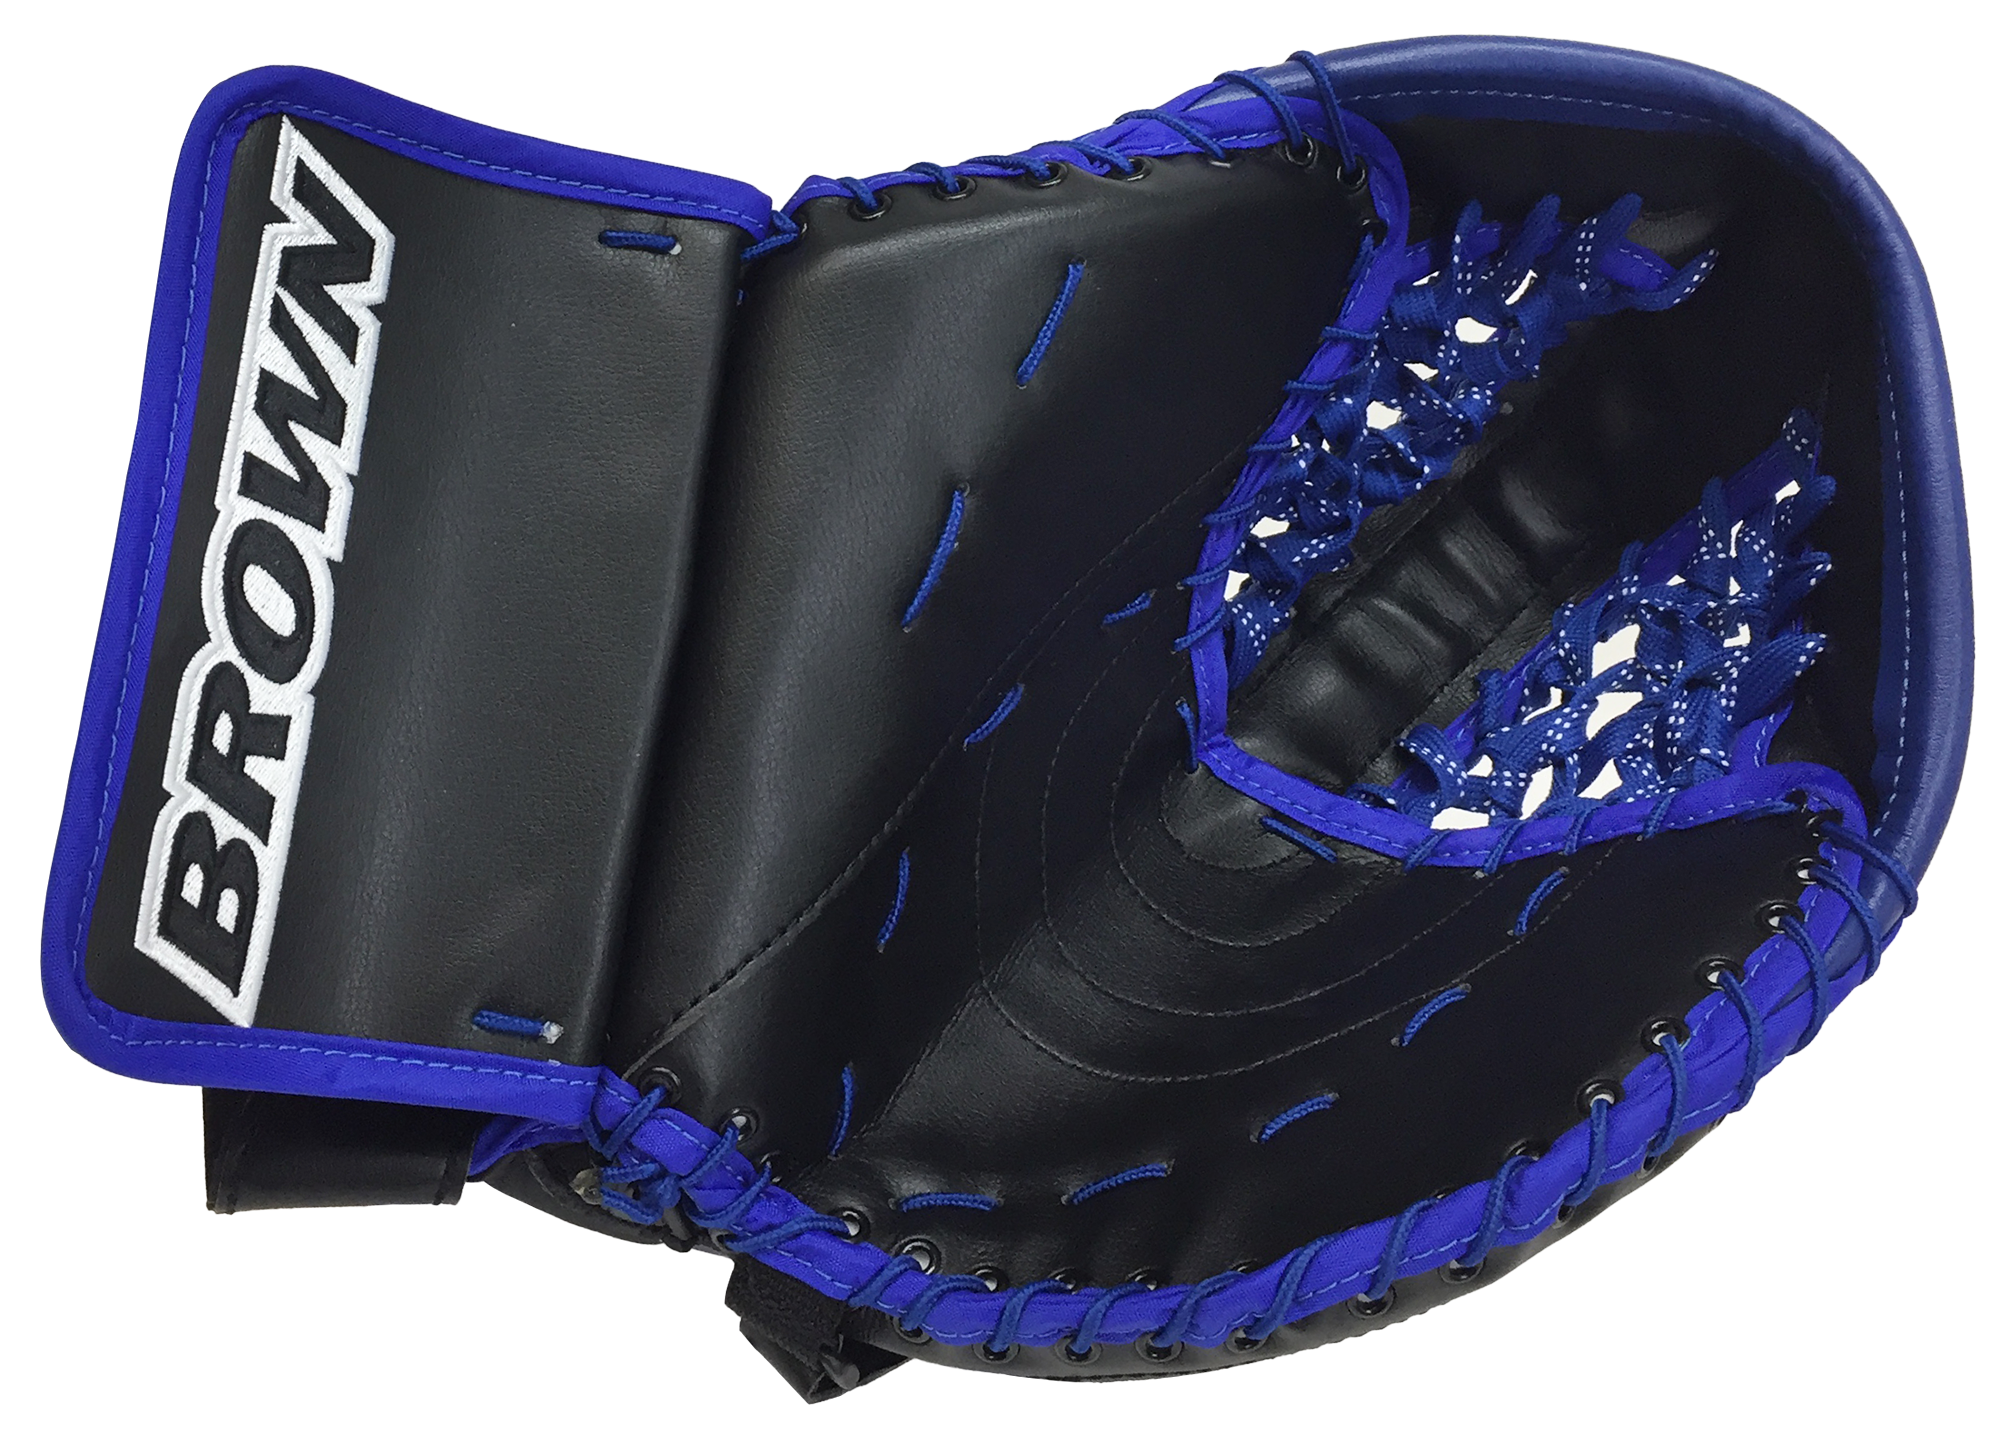 1800 catch glove in black and royal blue